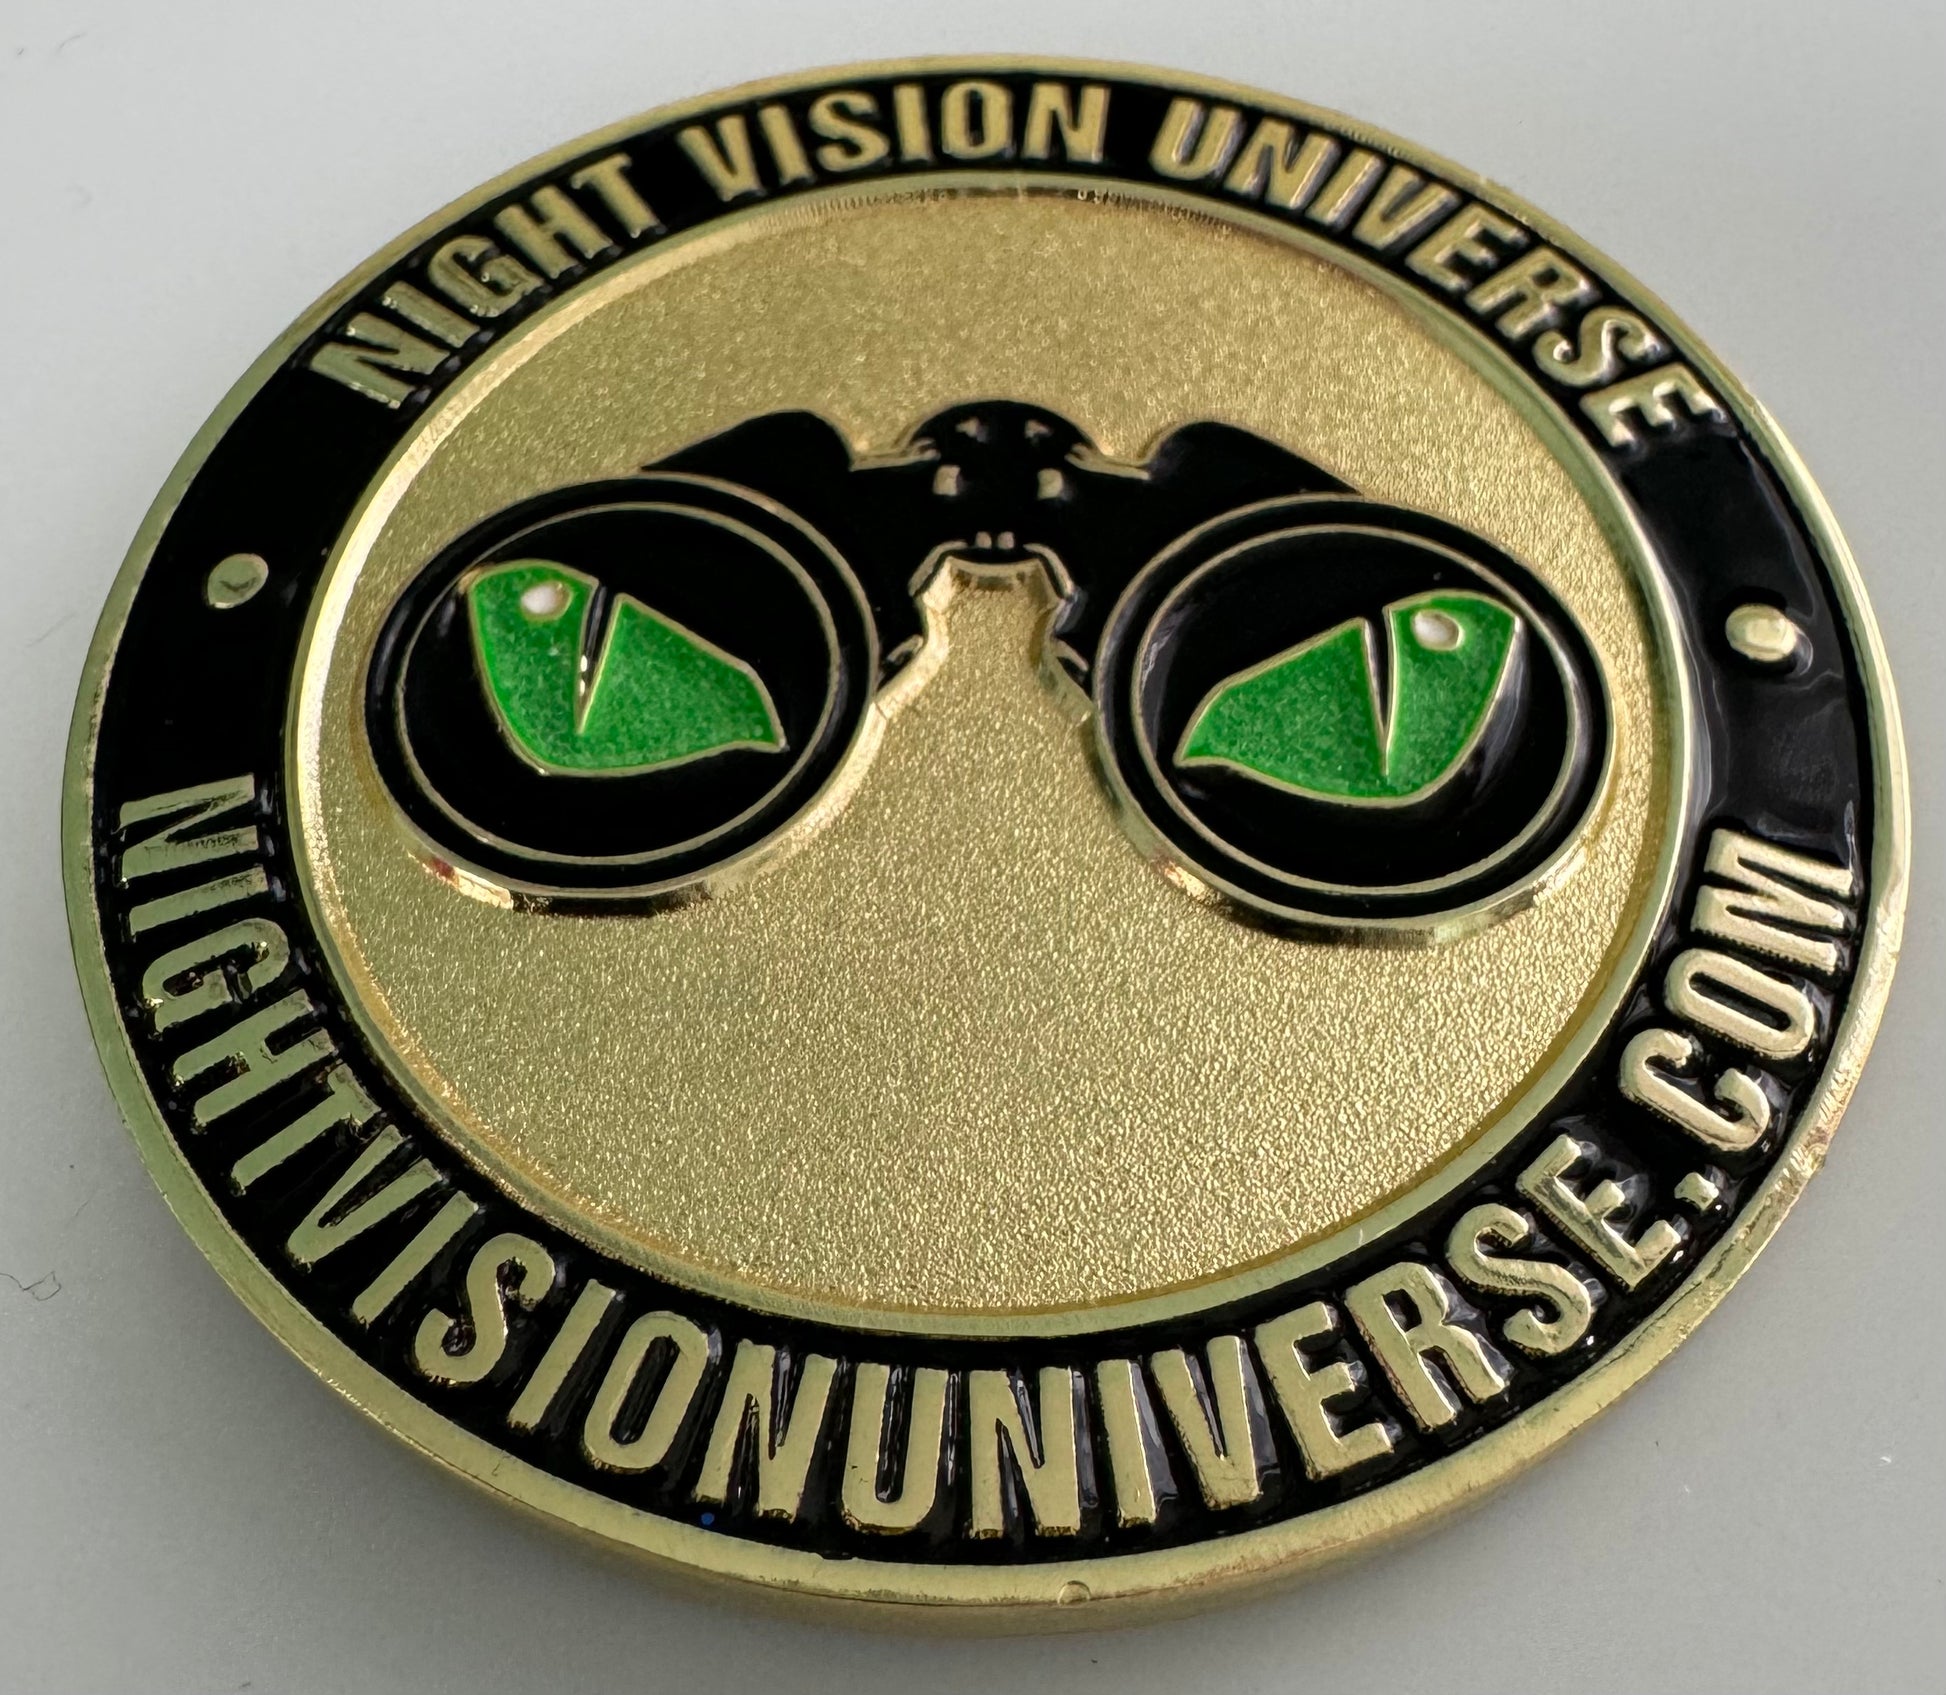 Night Vision Universe - NVU Let Us Be Your Eyes In The Dark Challenge Coin - NVU